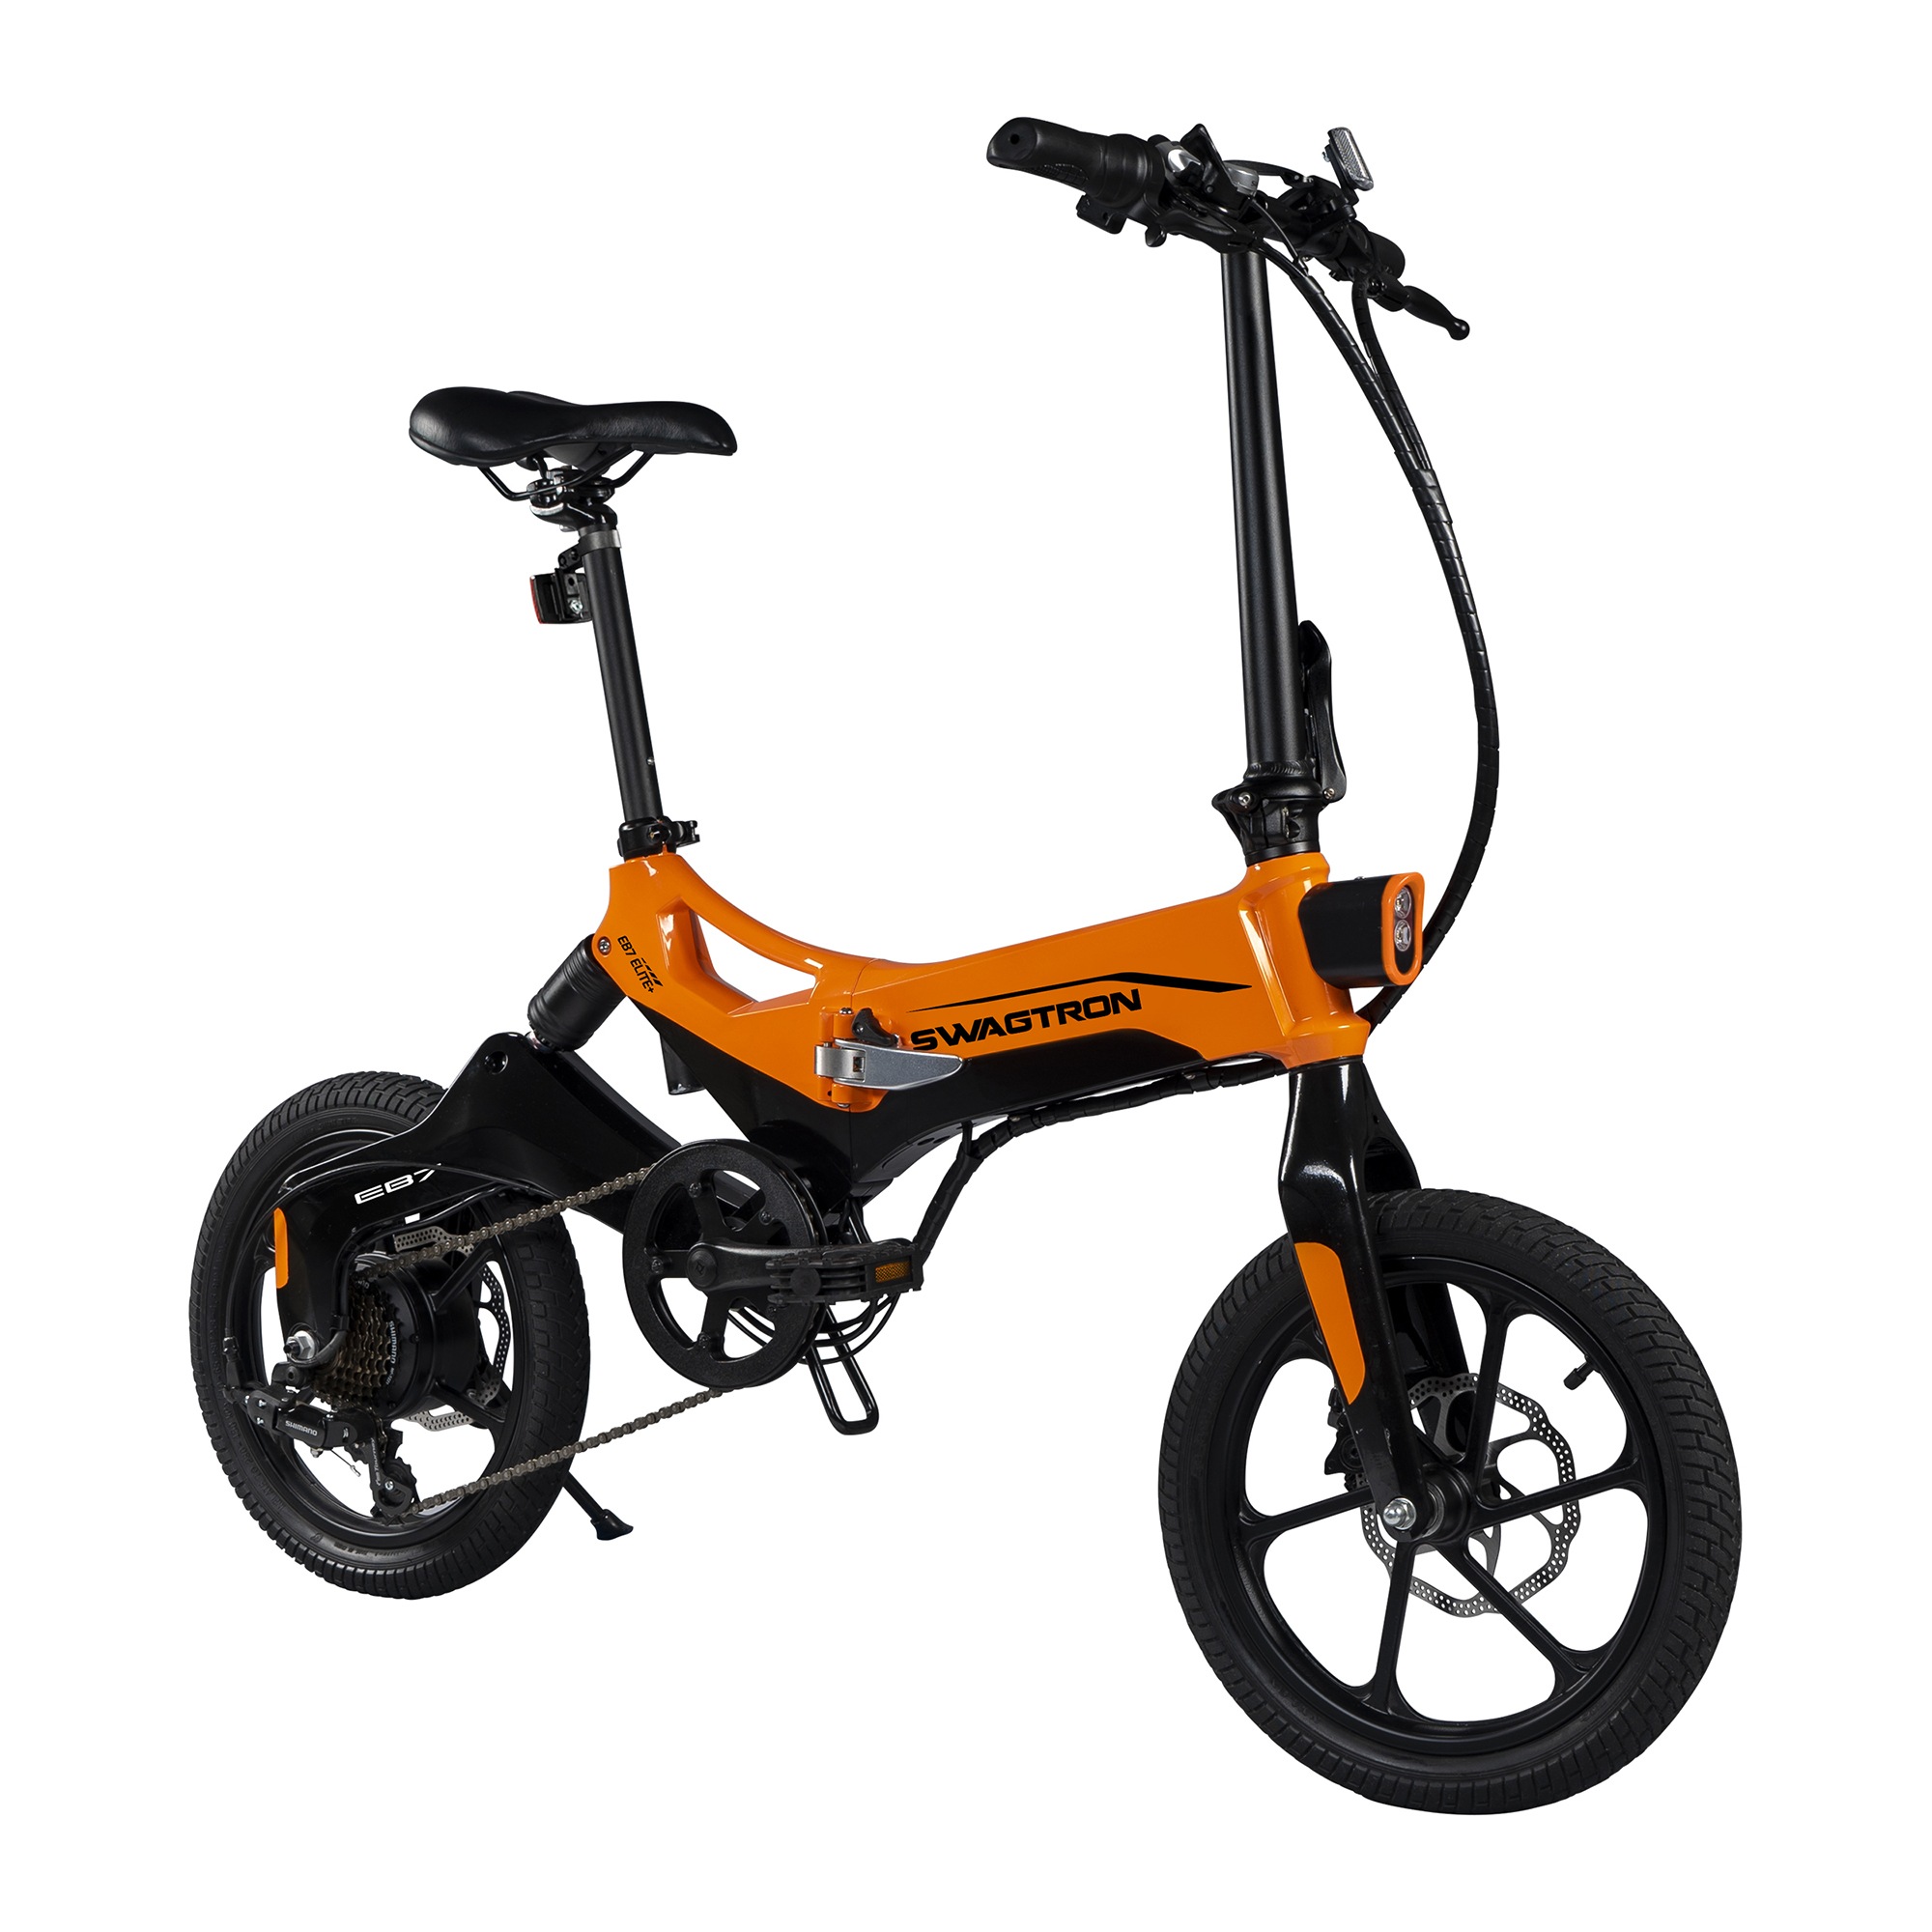 10 of the Best Folding Electric Bikes